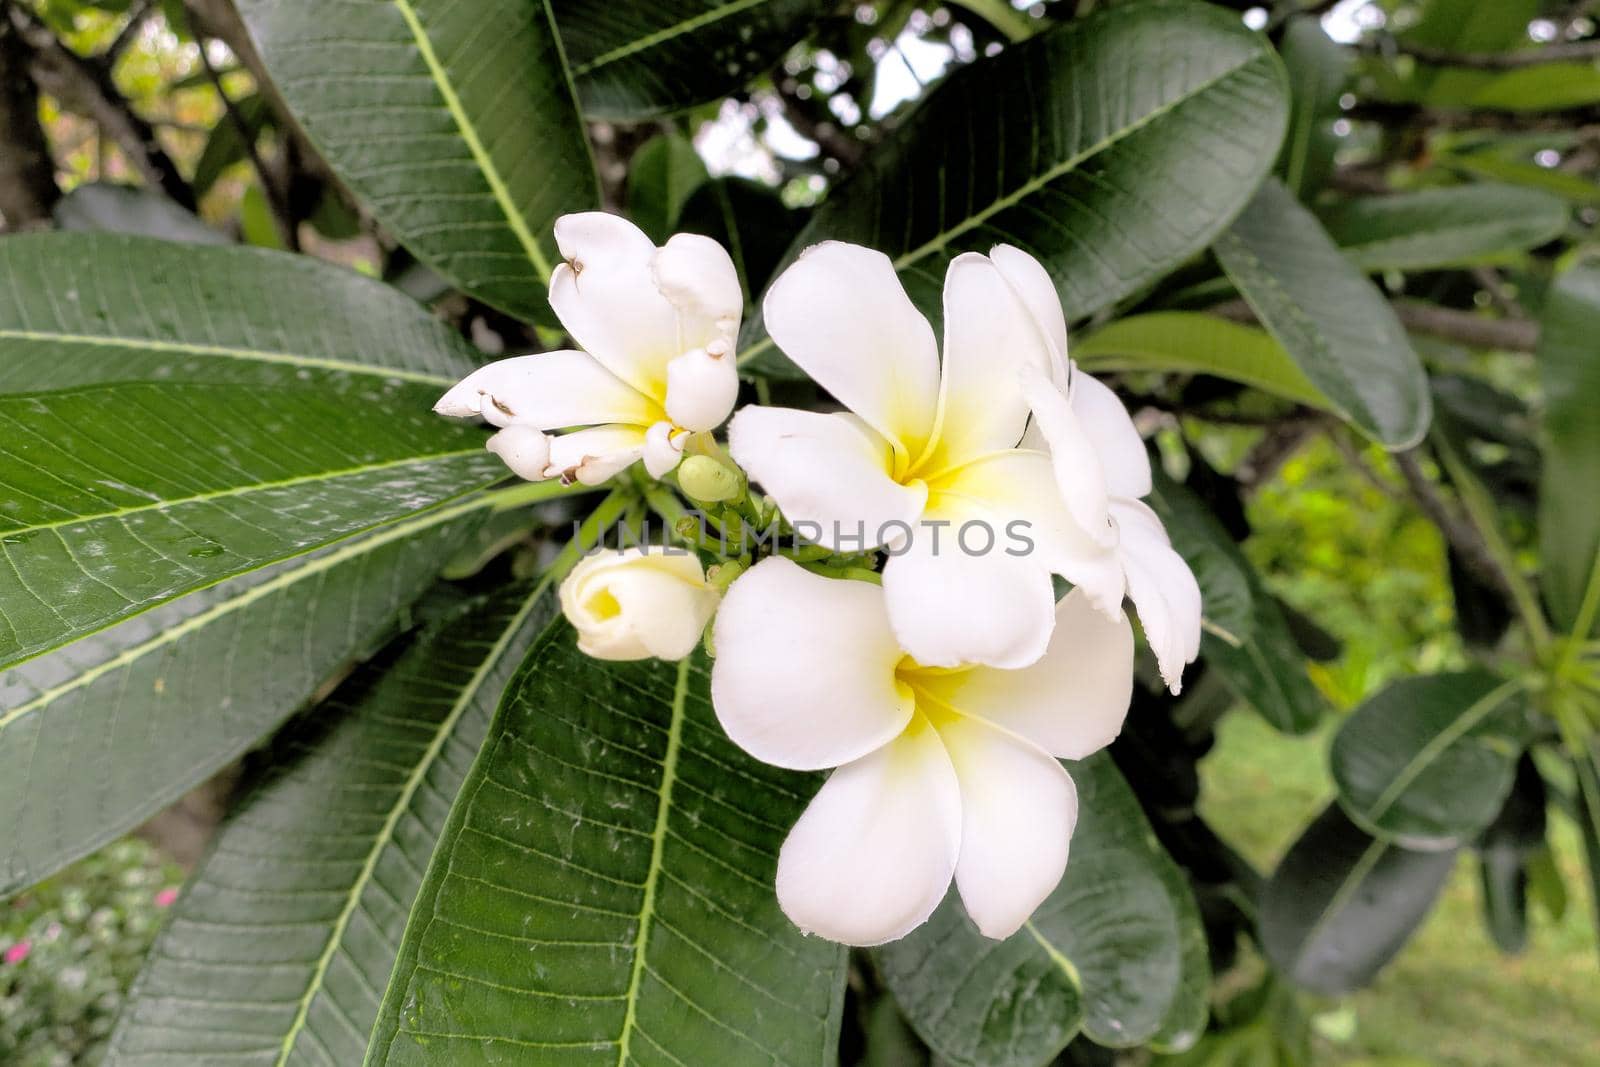 Plumeria or frangipani flower, Tropical flower.Lush tropical garden with assorted colorful flowers and plants